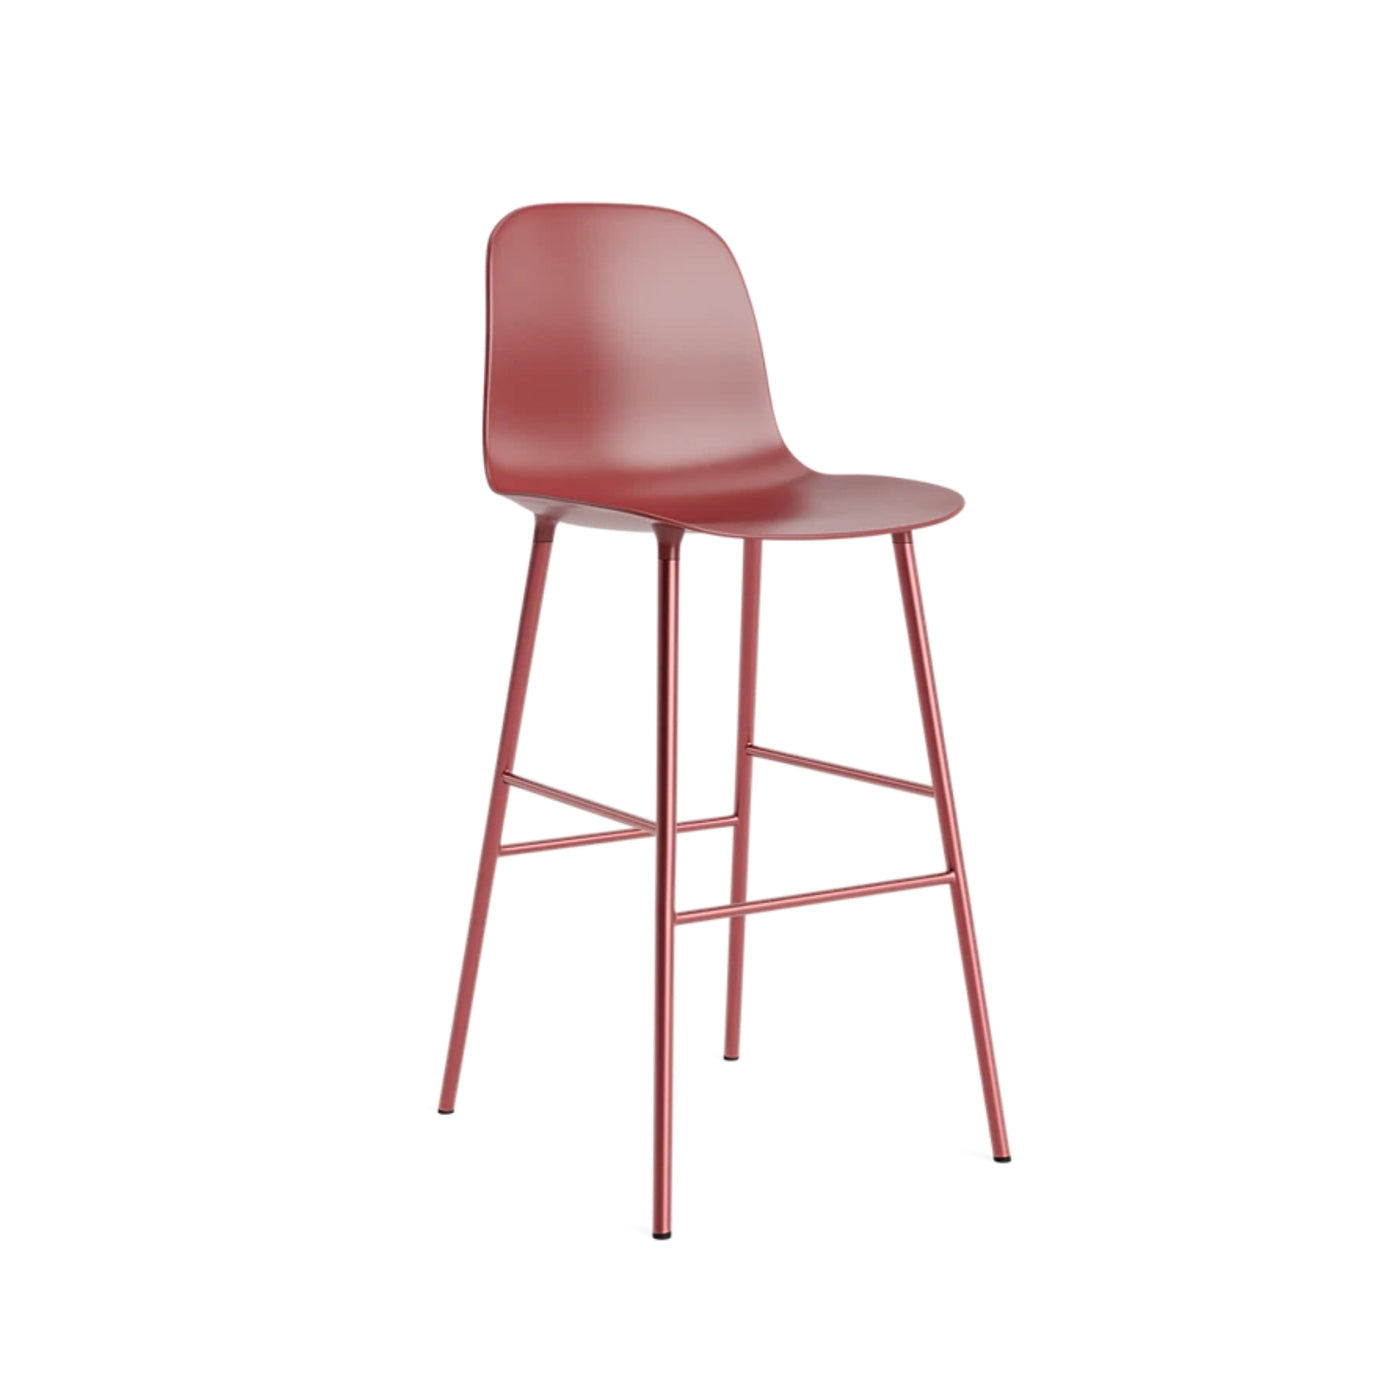 Normann Copenhagen Form Bar Chair Steel at someday designs. #colour_red